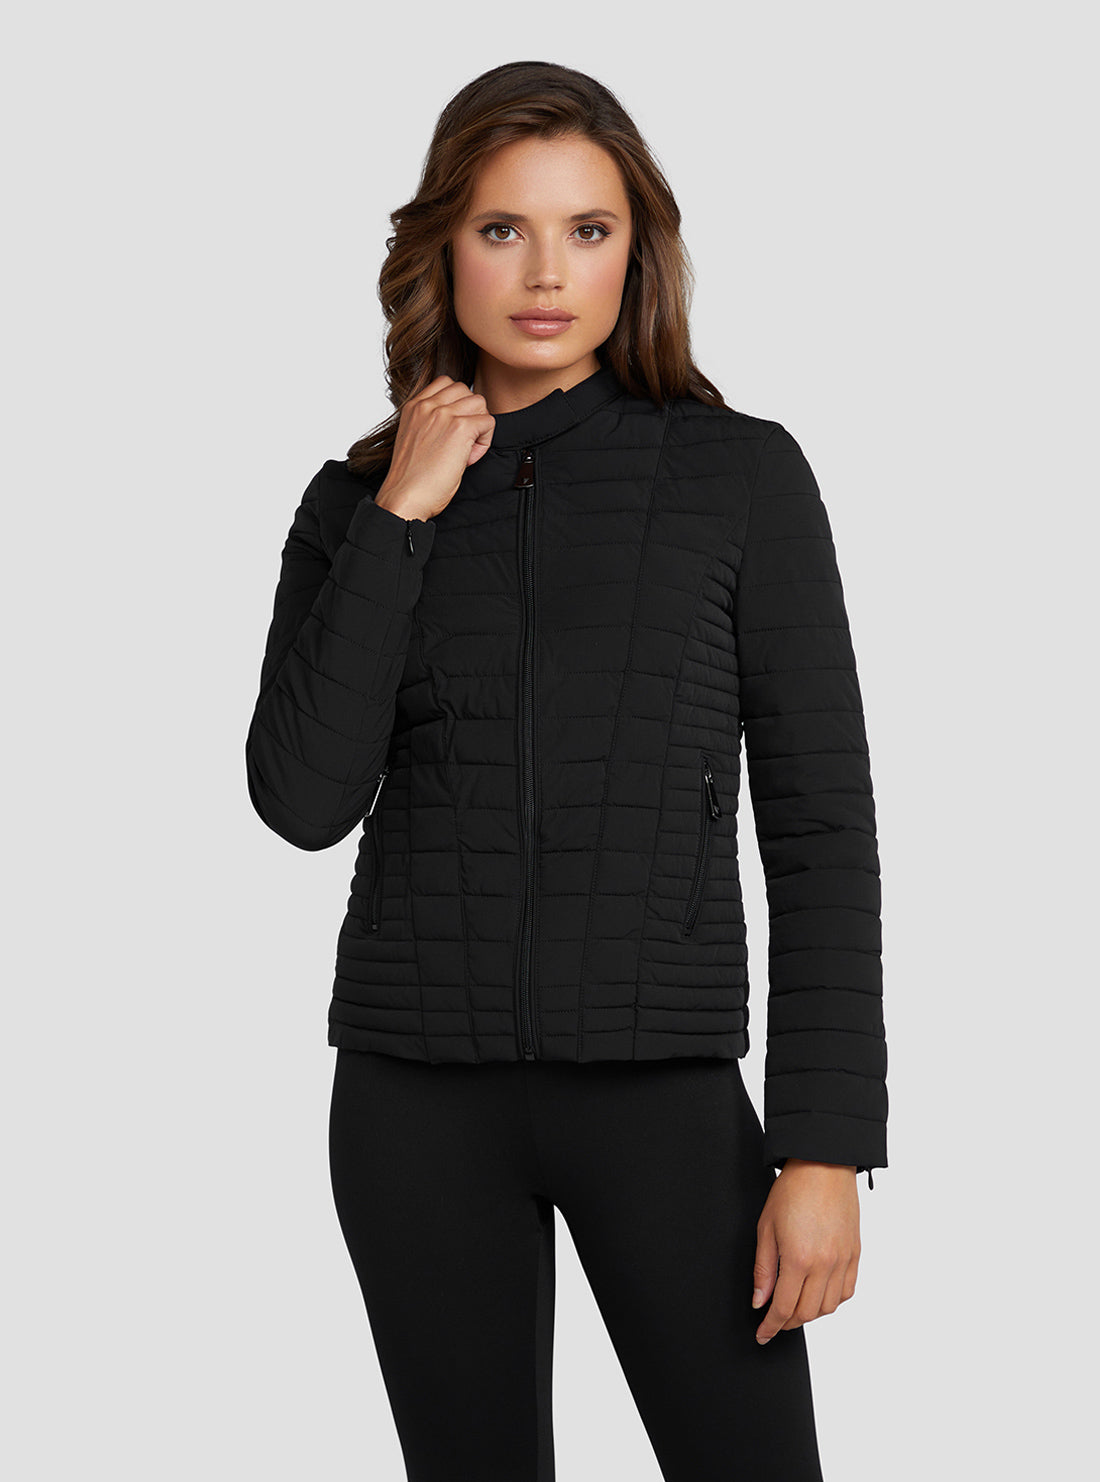 GUESS Women's Eco Black Vona Jacket W2YL1IW6NW2 Close View